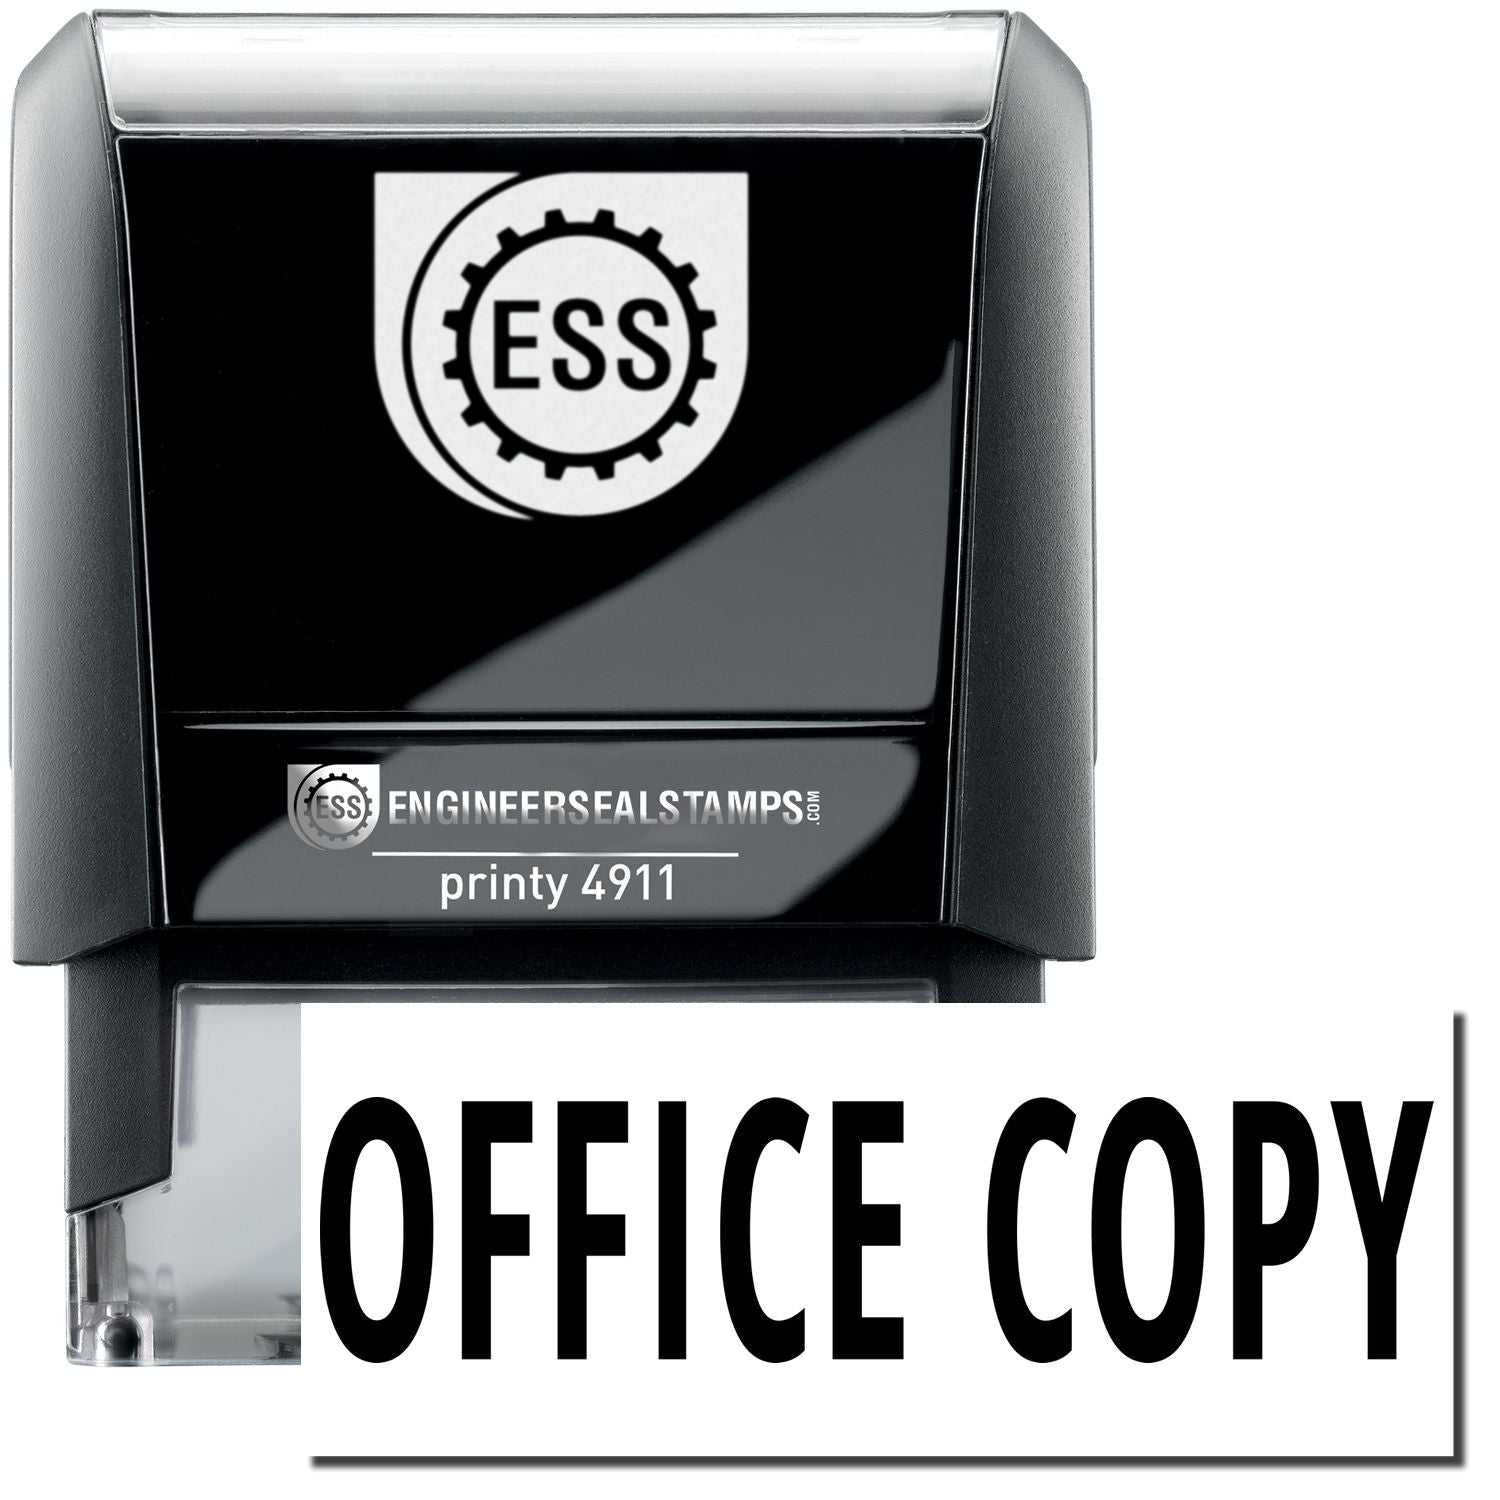 A self-inking stamp with a stamped image showing how the text "OFFICE COPY" is displayed after stamping.